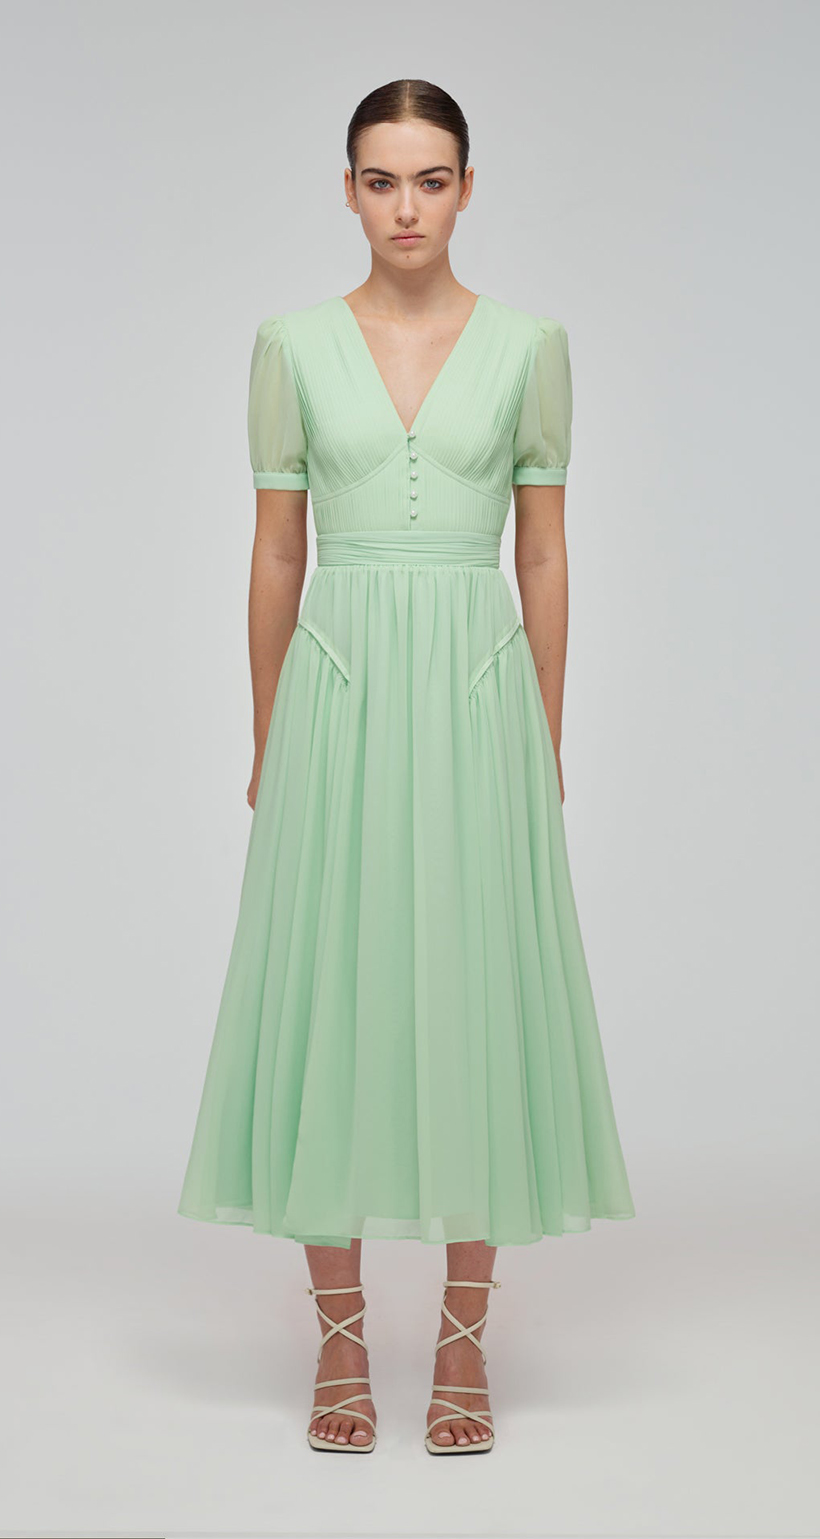 Kate Middleton's Mint Green Dress by Self Portrait - Worn In The Bahamas